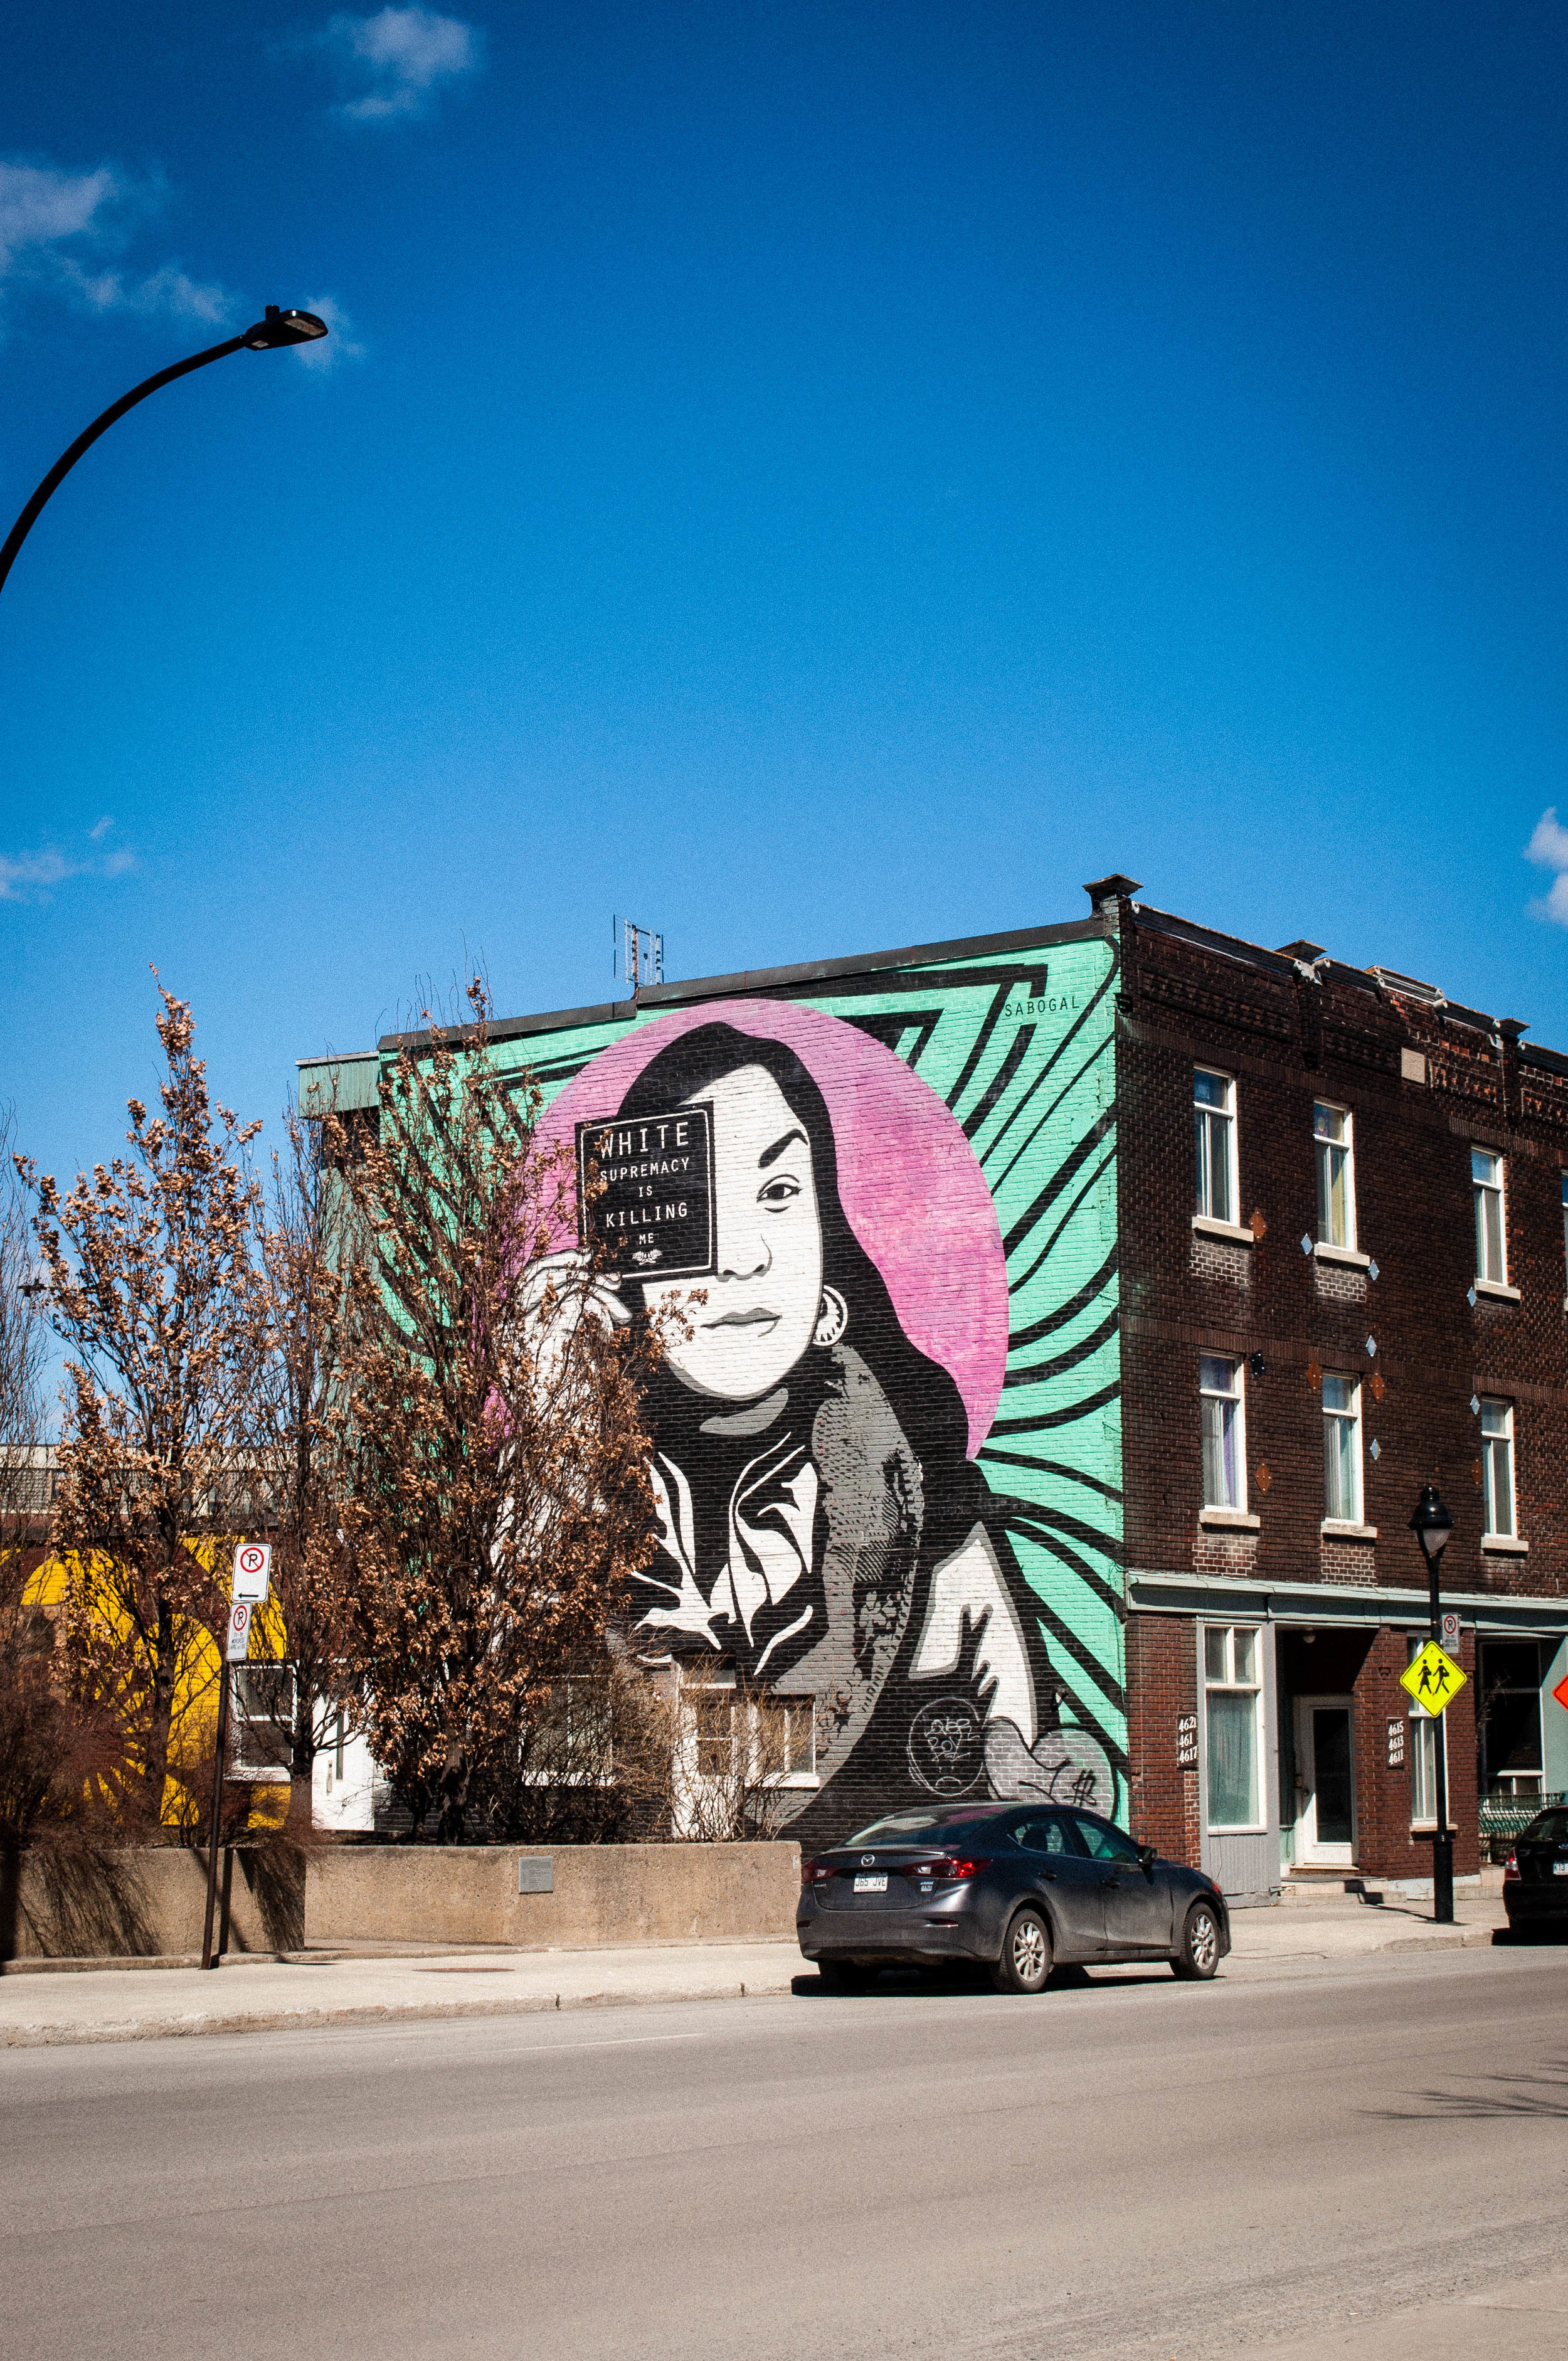 Montreal street art -Mural in Saint-Henri by a Native American Artist, Jessica Sabogal. Graffiti proposed as the best street art in Montreal